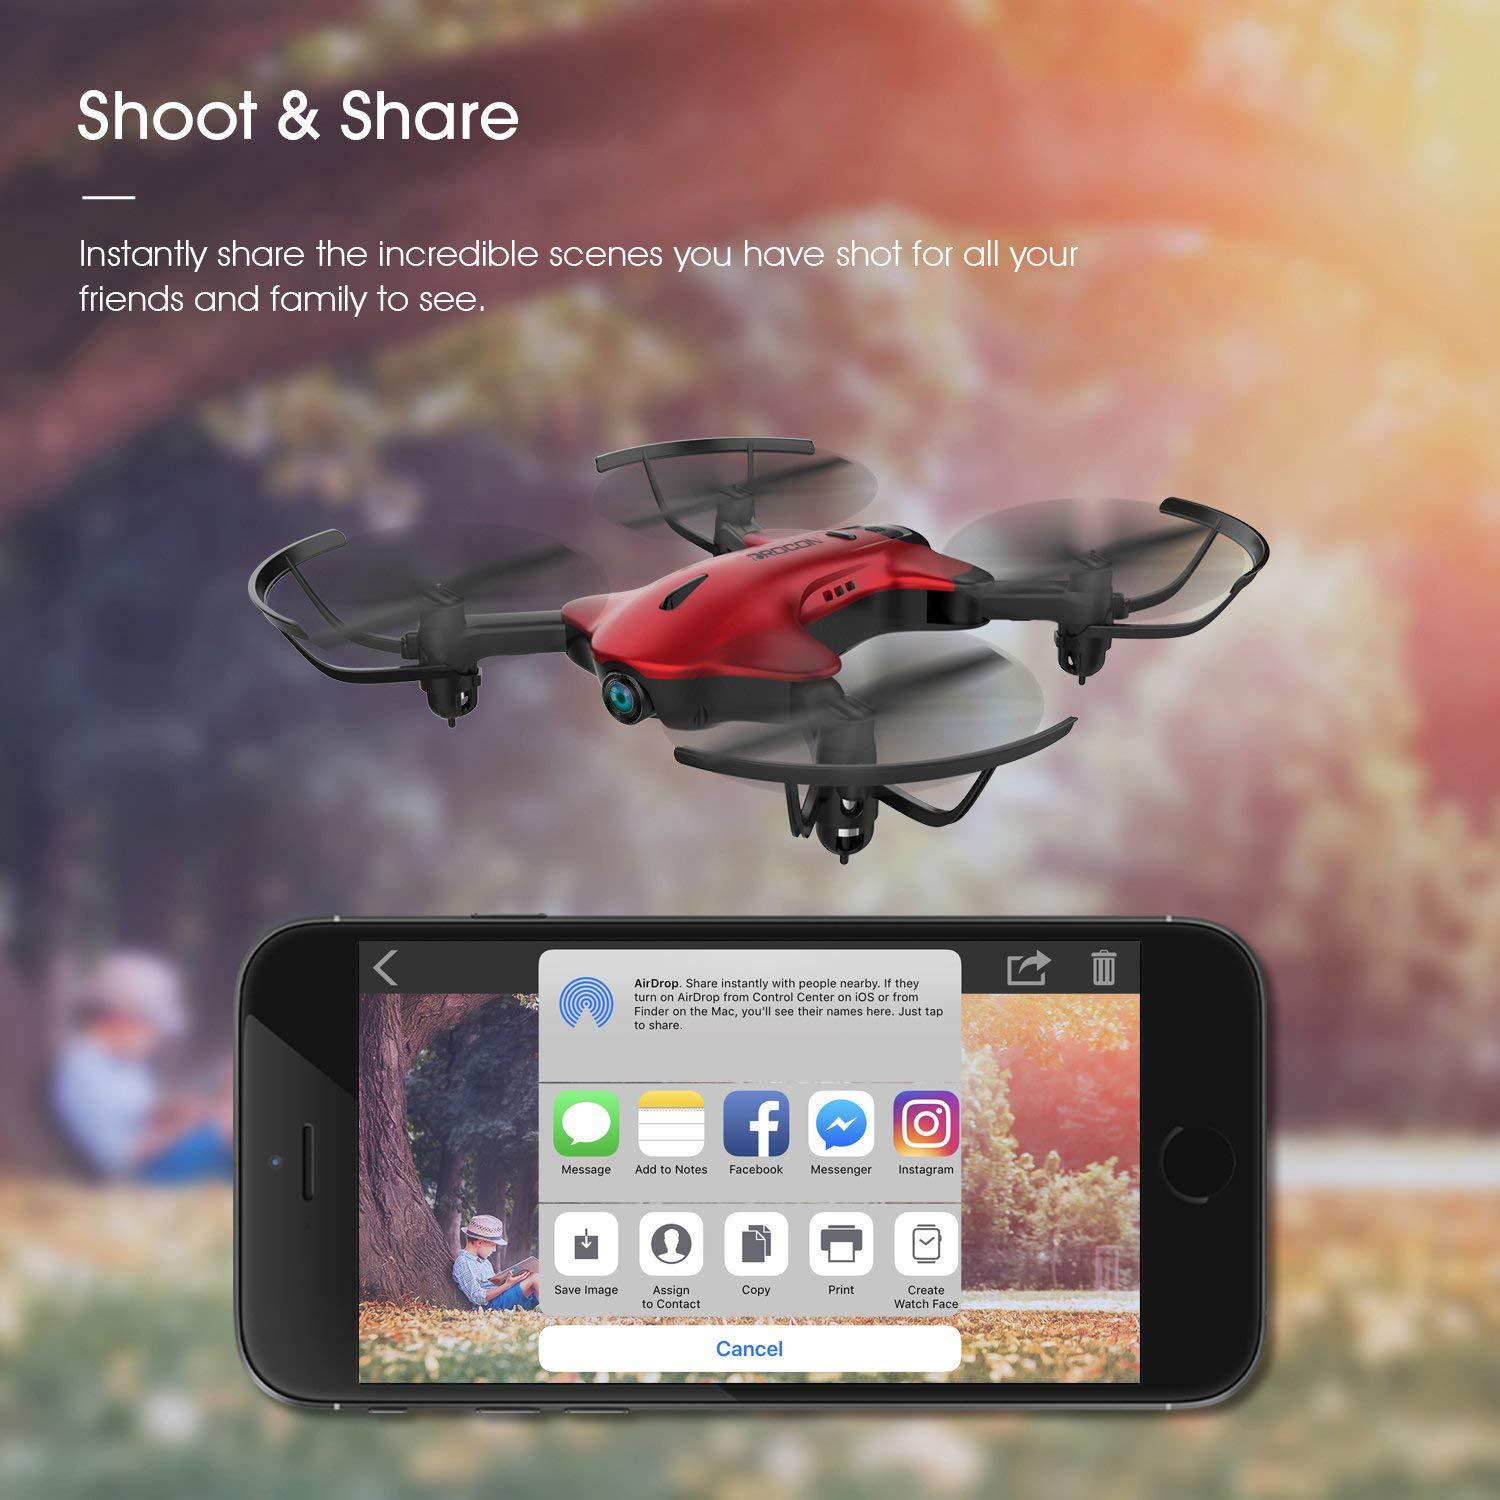  Drone for Kids, Spacekey FPV Wi-Fi Drone with Camera 1080P FHD,  Real-time Video Feed, Great Drone for Beginners, Quadcopter Drone with  Altitude Hold, One-Key Take-Off, Landing Foldable Arms (Red) : Toys